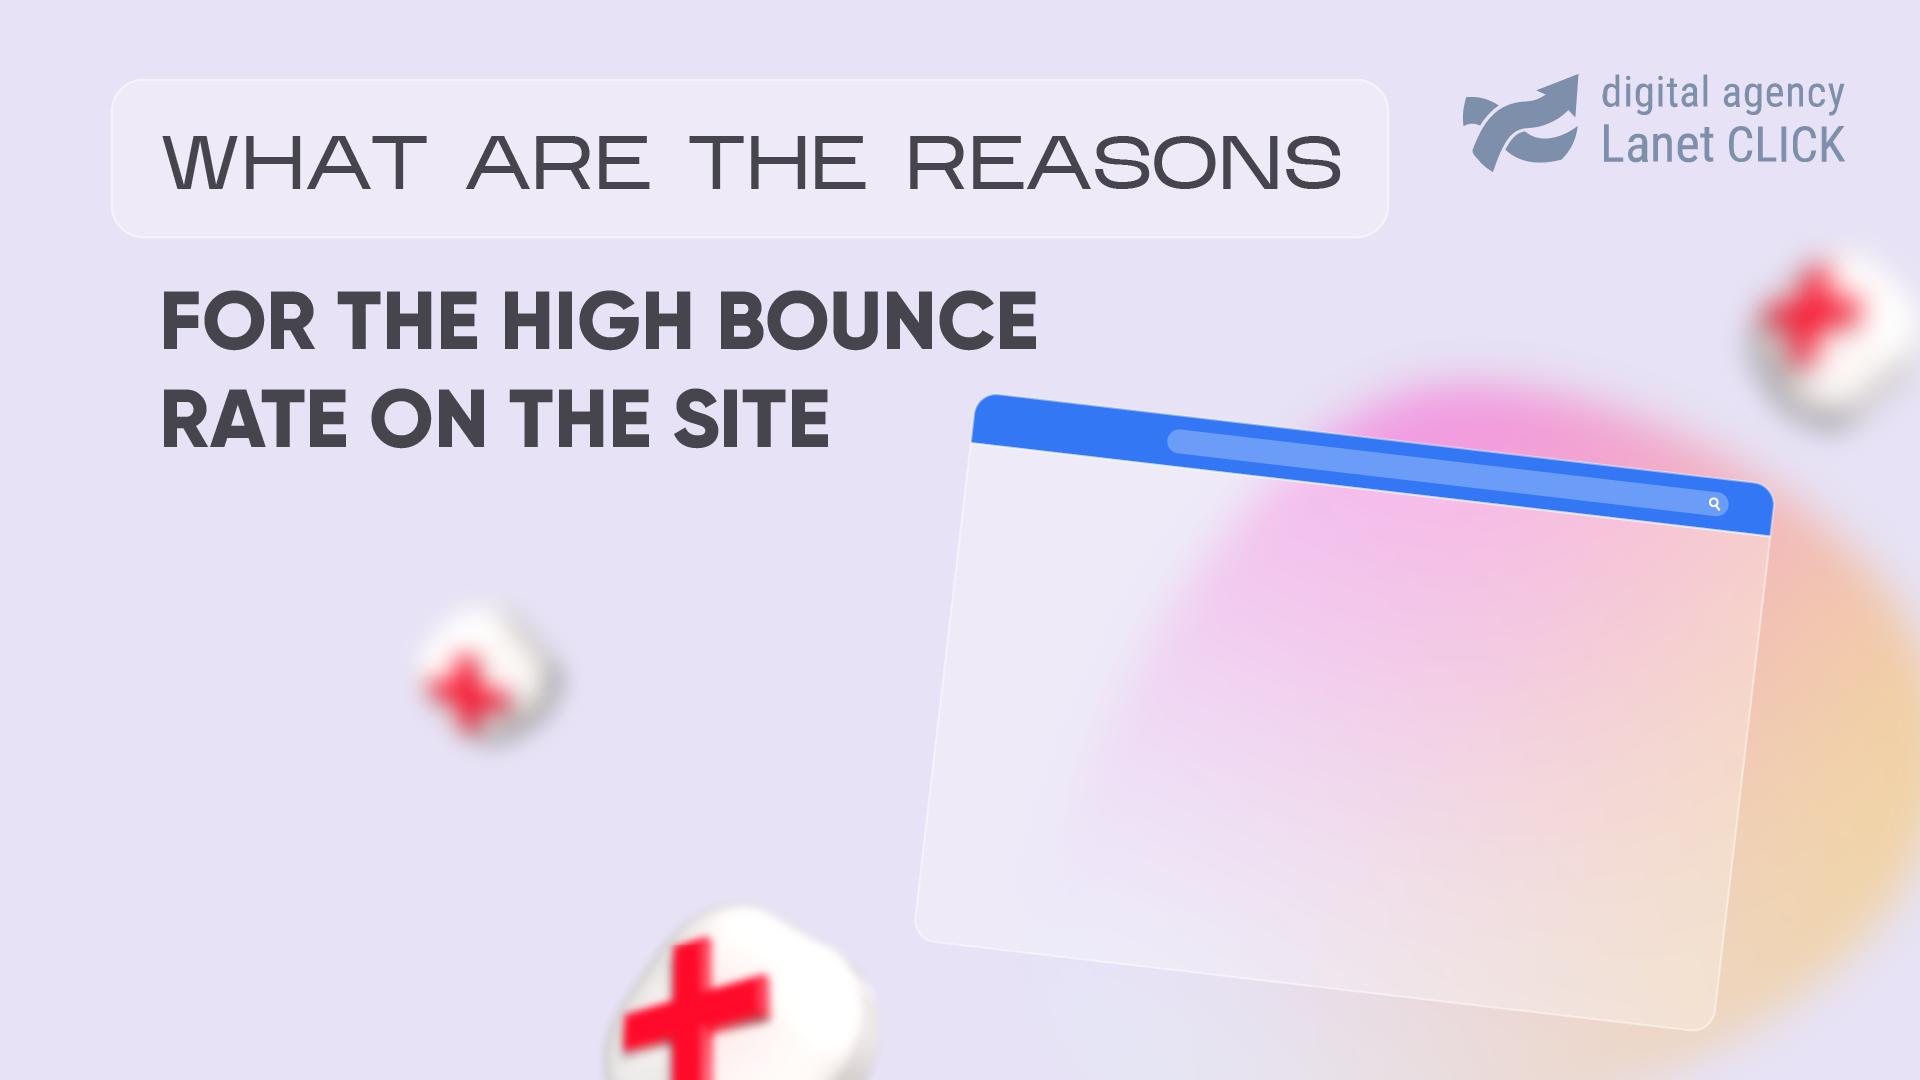 What are the reasons for the high bounce rate on the site